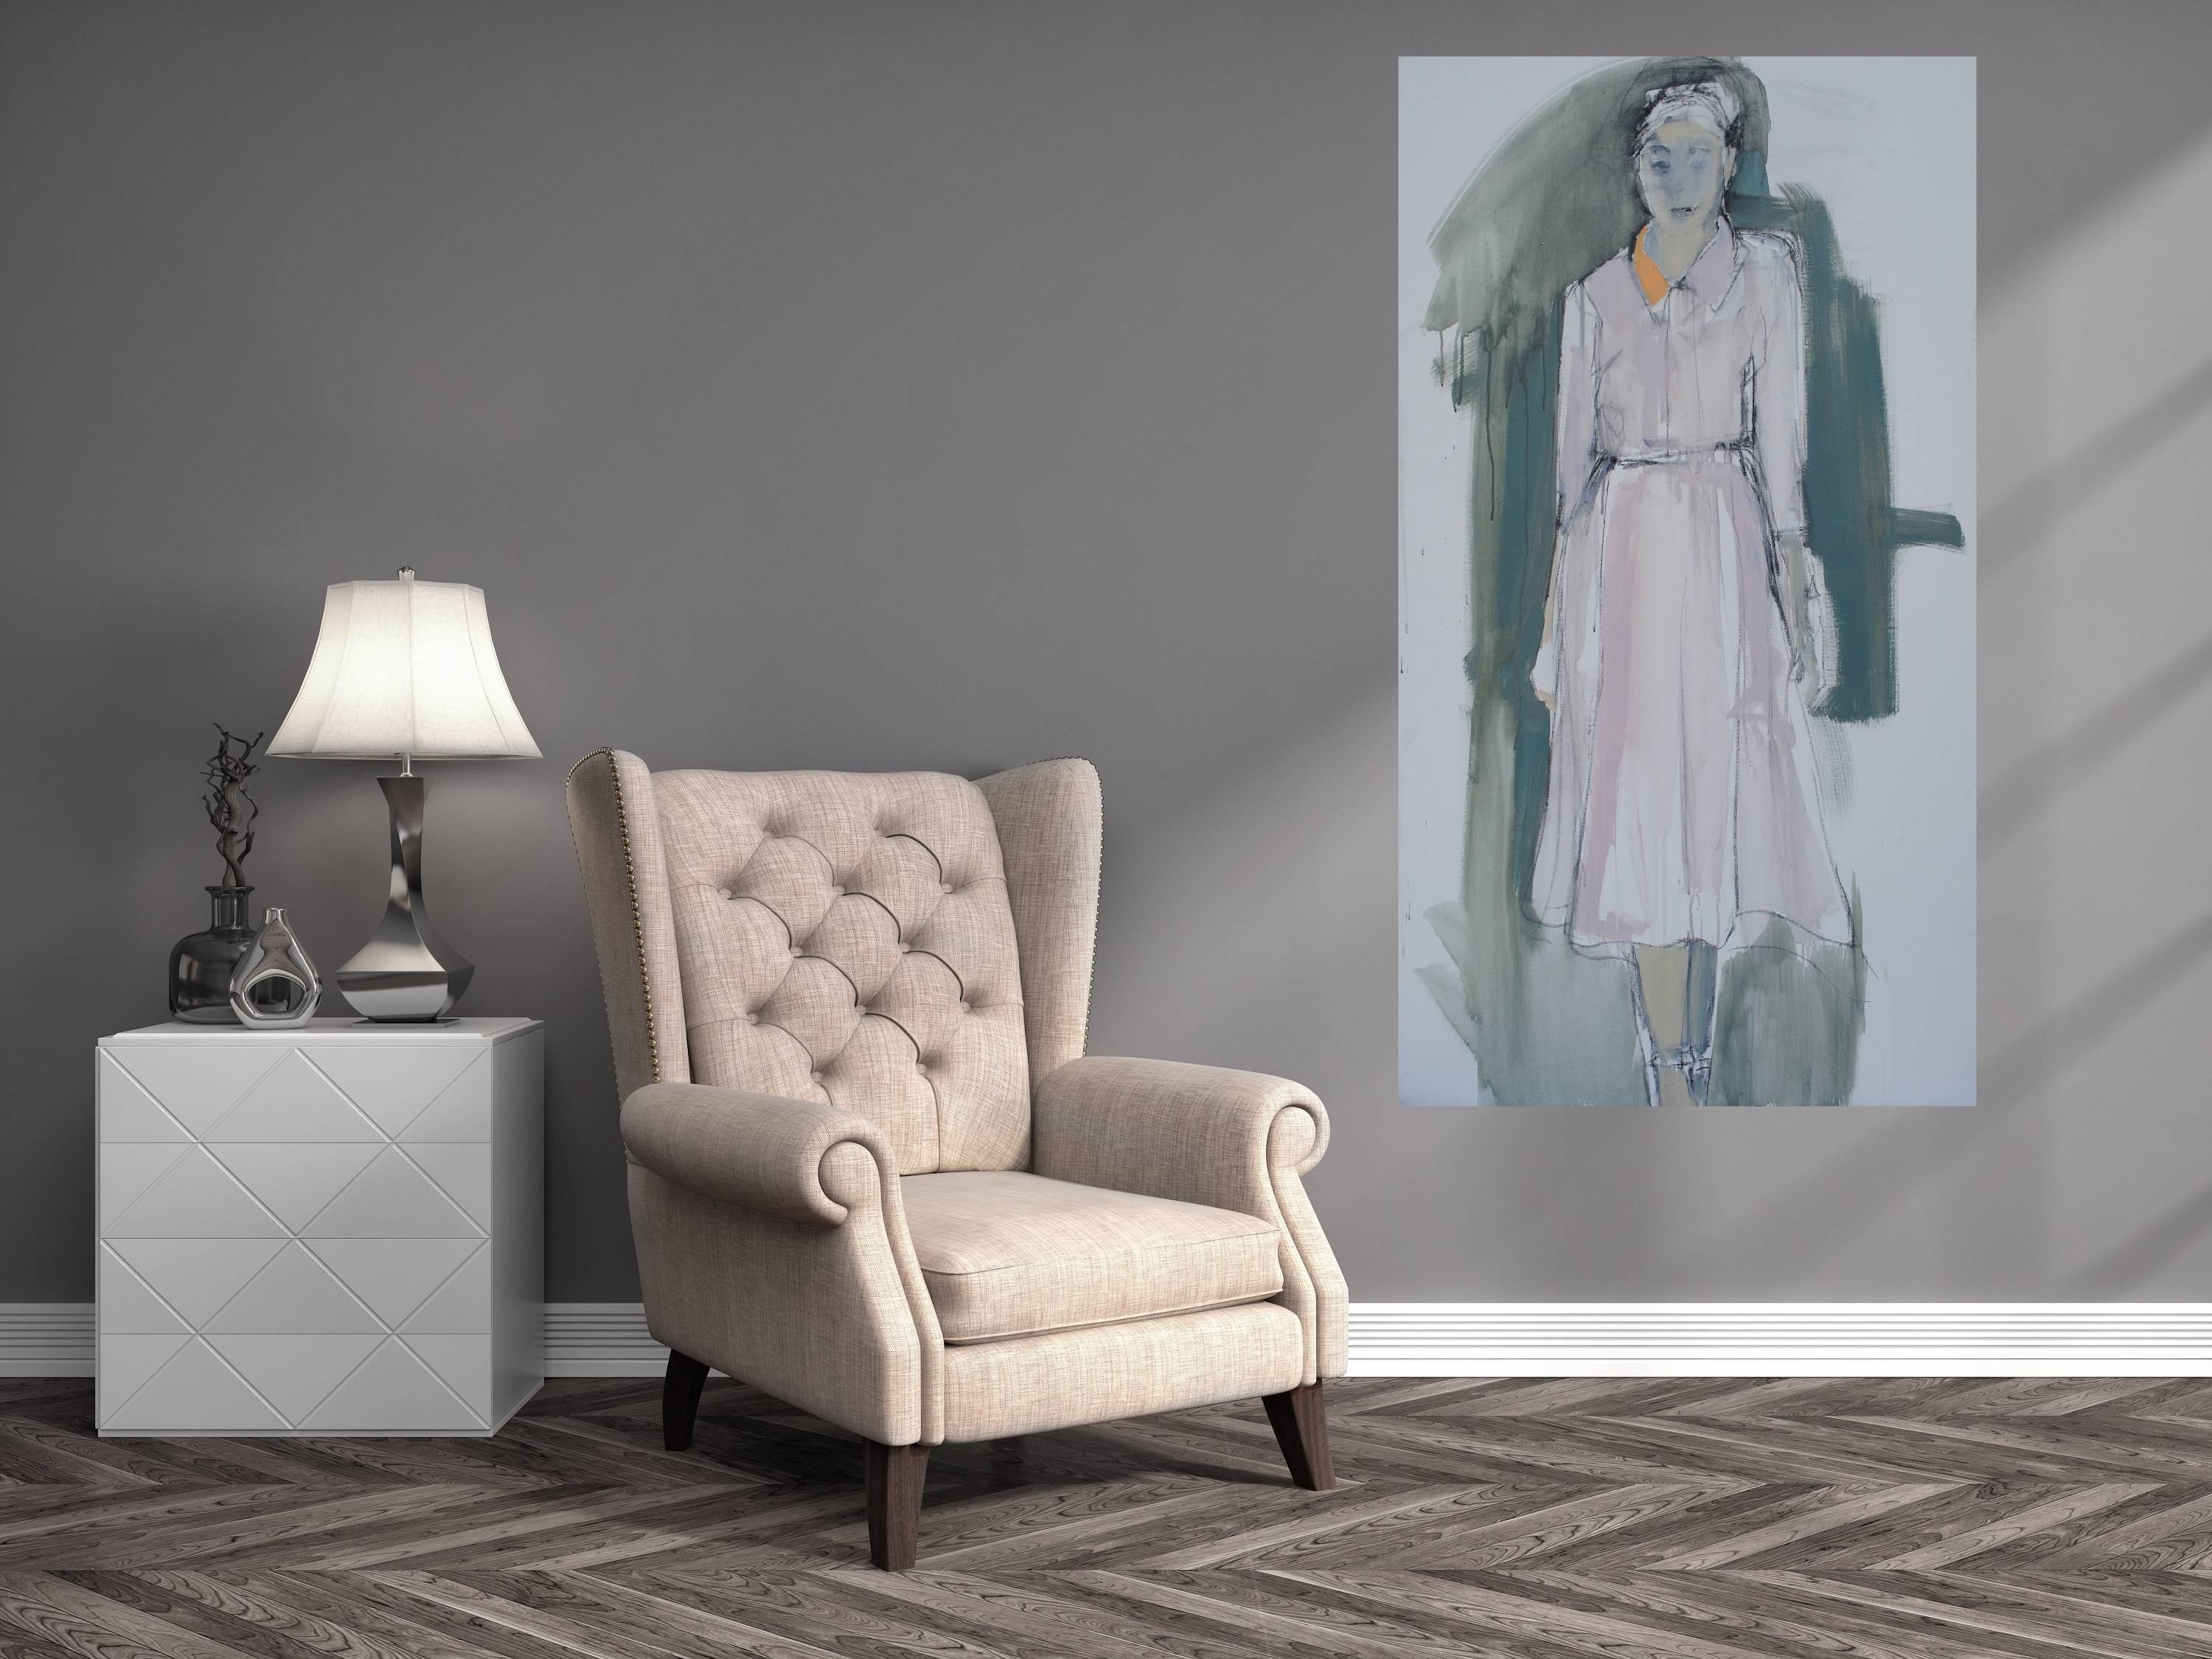 All Her Own, Vertical Format Figurative Mixed Media on Canvas Painting - Gray Figurative Painting by Kelley B. Ogburn